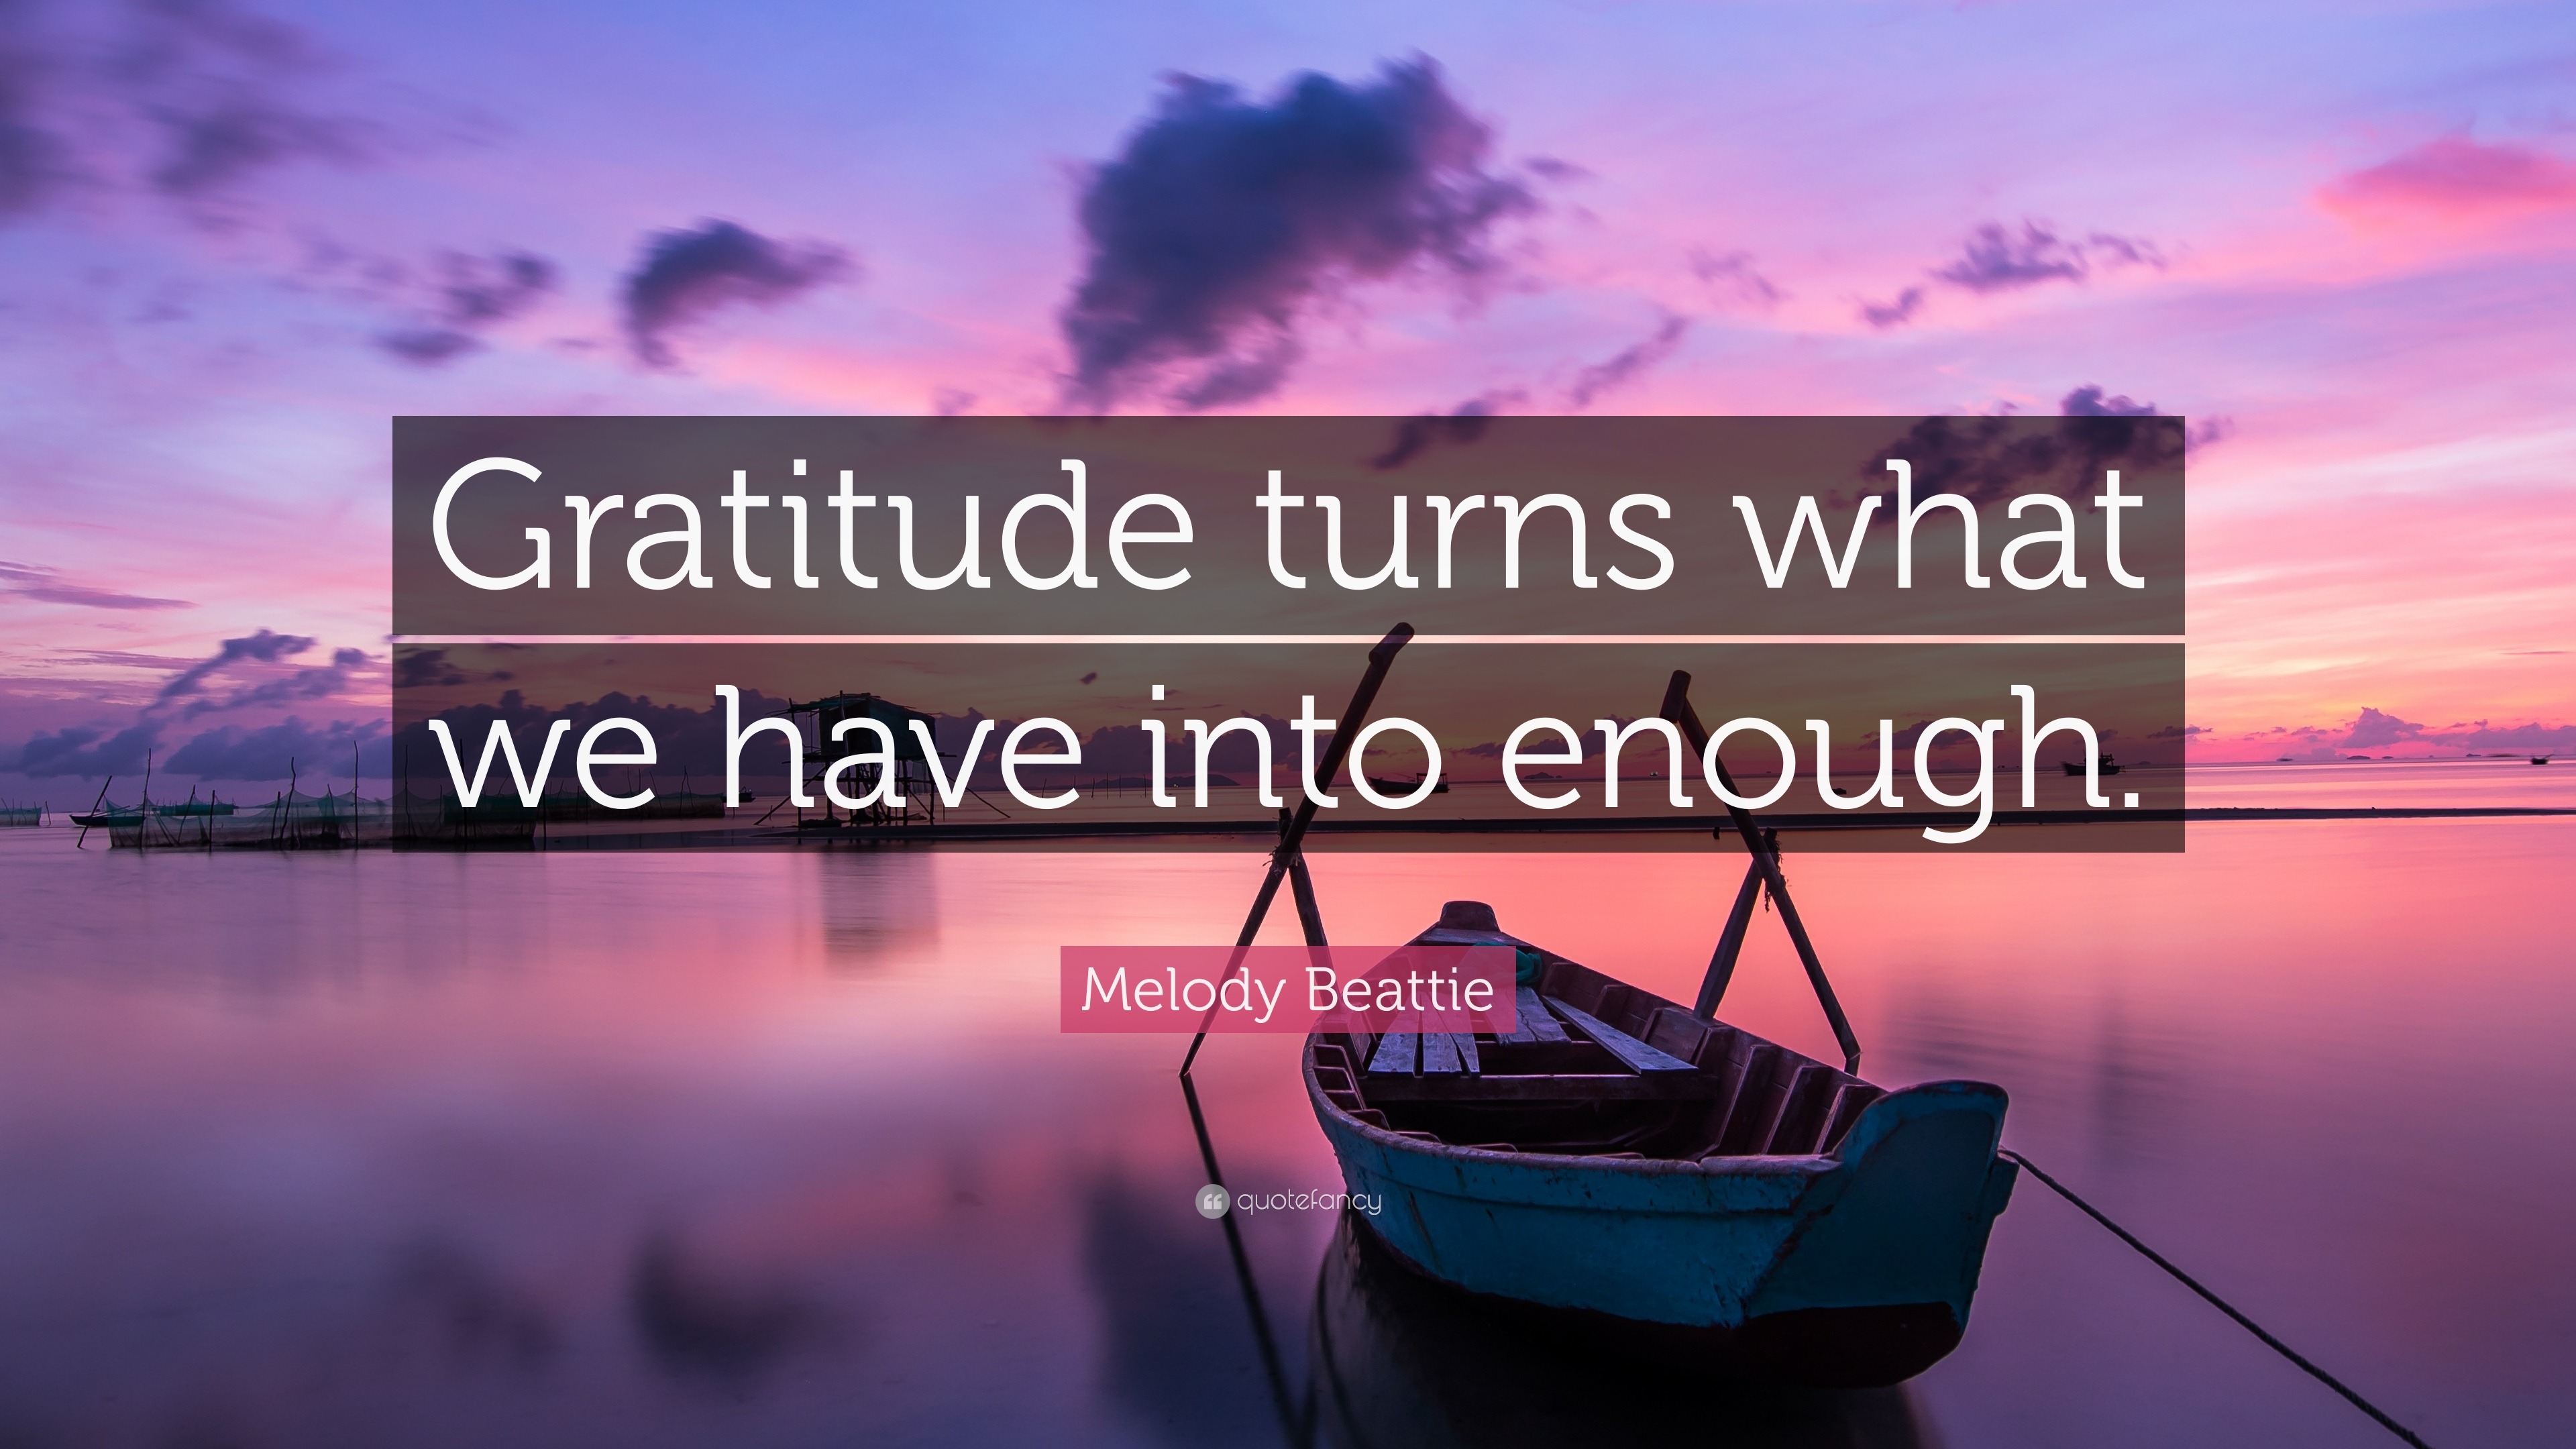 Melody Beattie Quote: “Gratitude turns what we have into enough.”